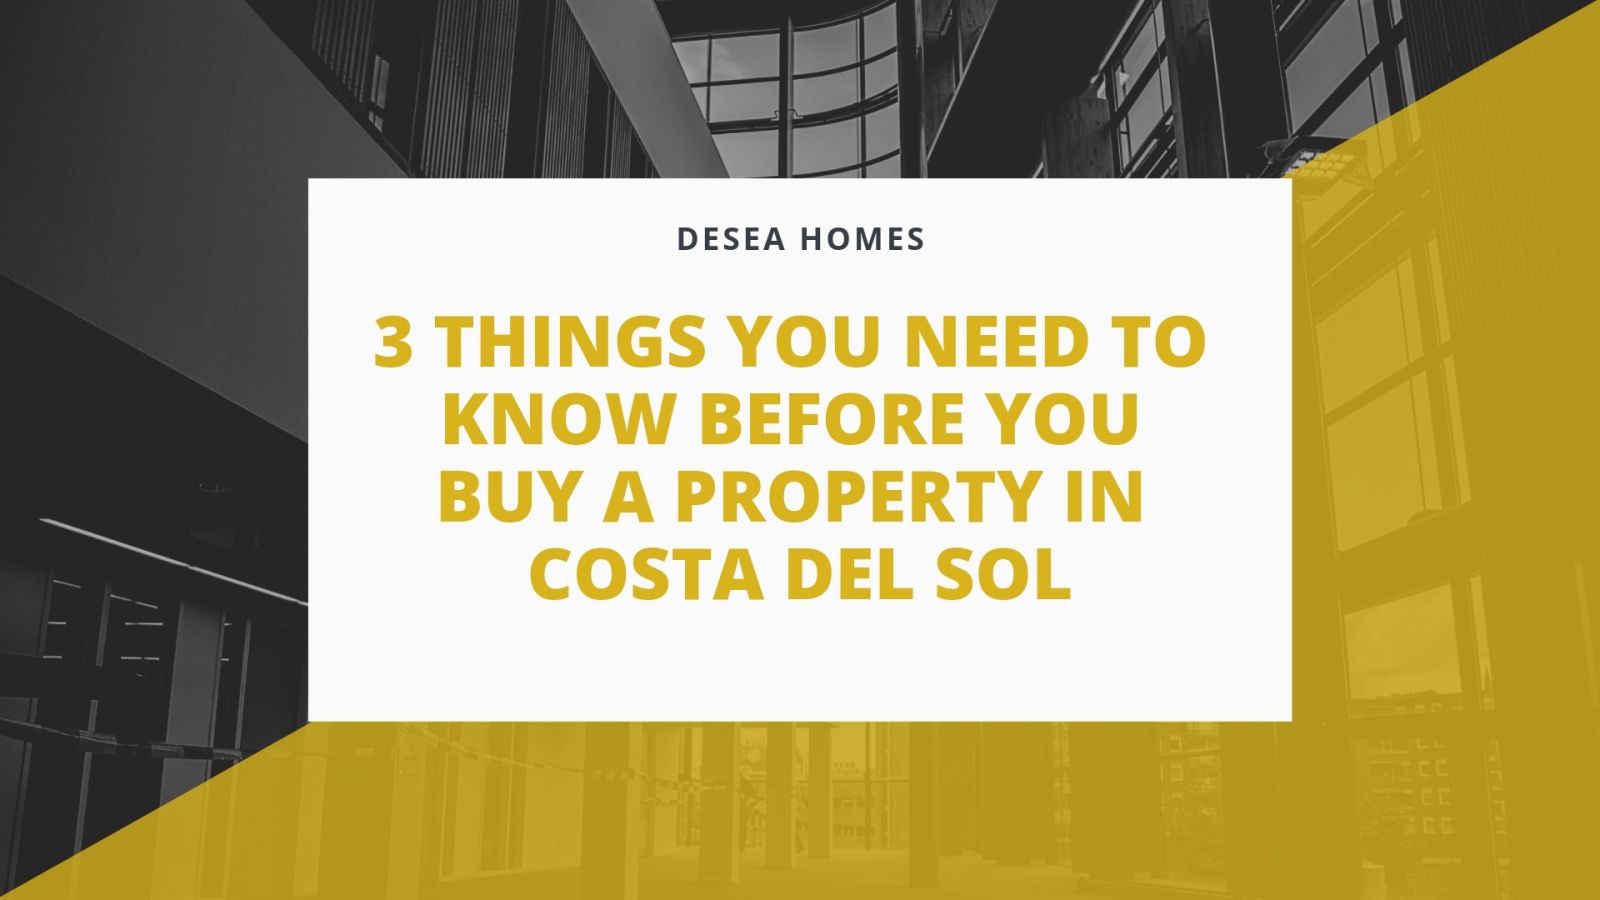 3 things you need to know before you buy a property in Costa del Sol